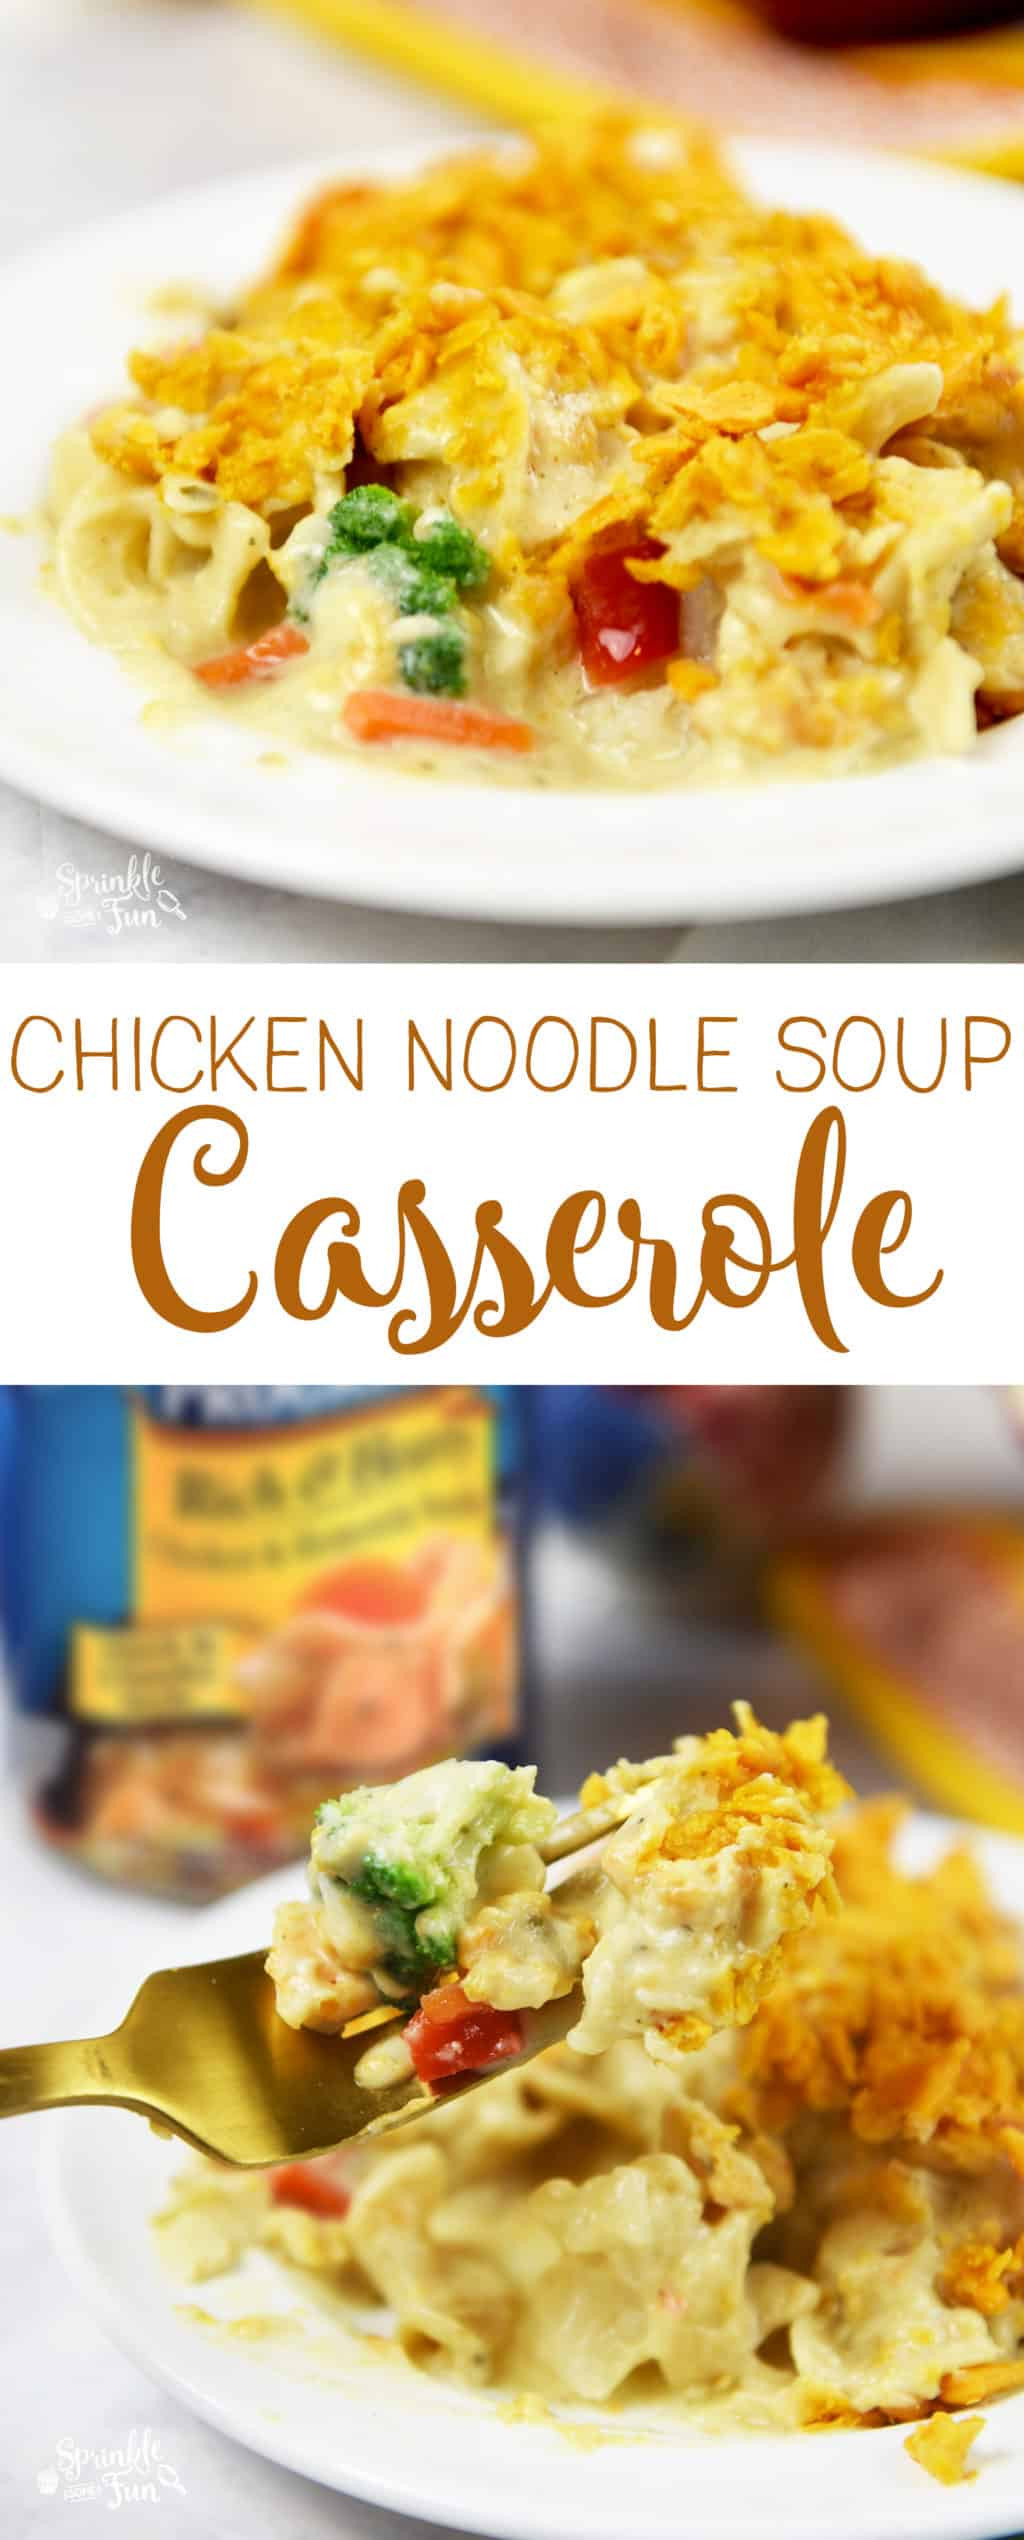 Chicken Noodle Soup Casserole
 Chicken Noodle Soup Casserole with Veggies Sprinkle Some Fun